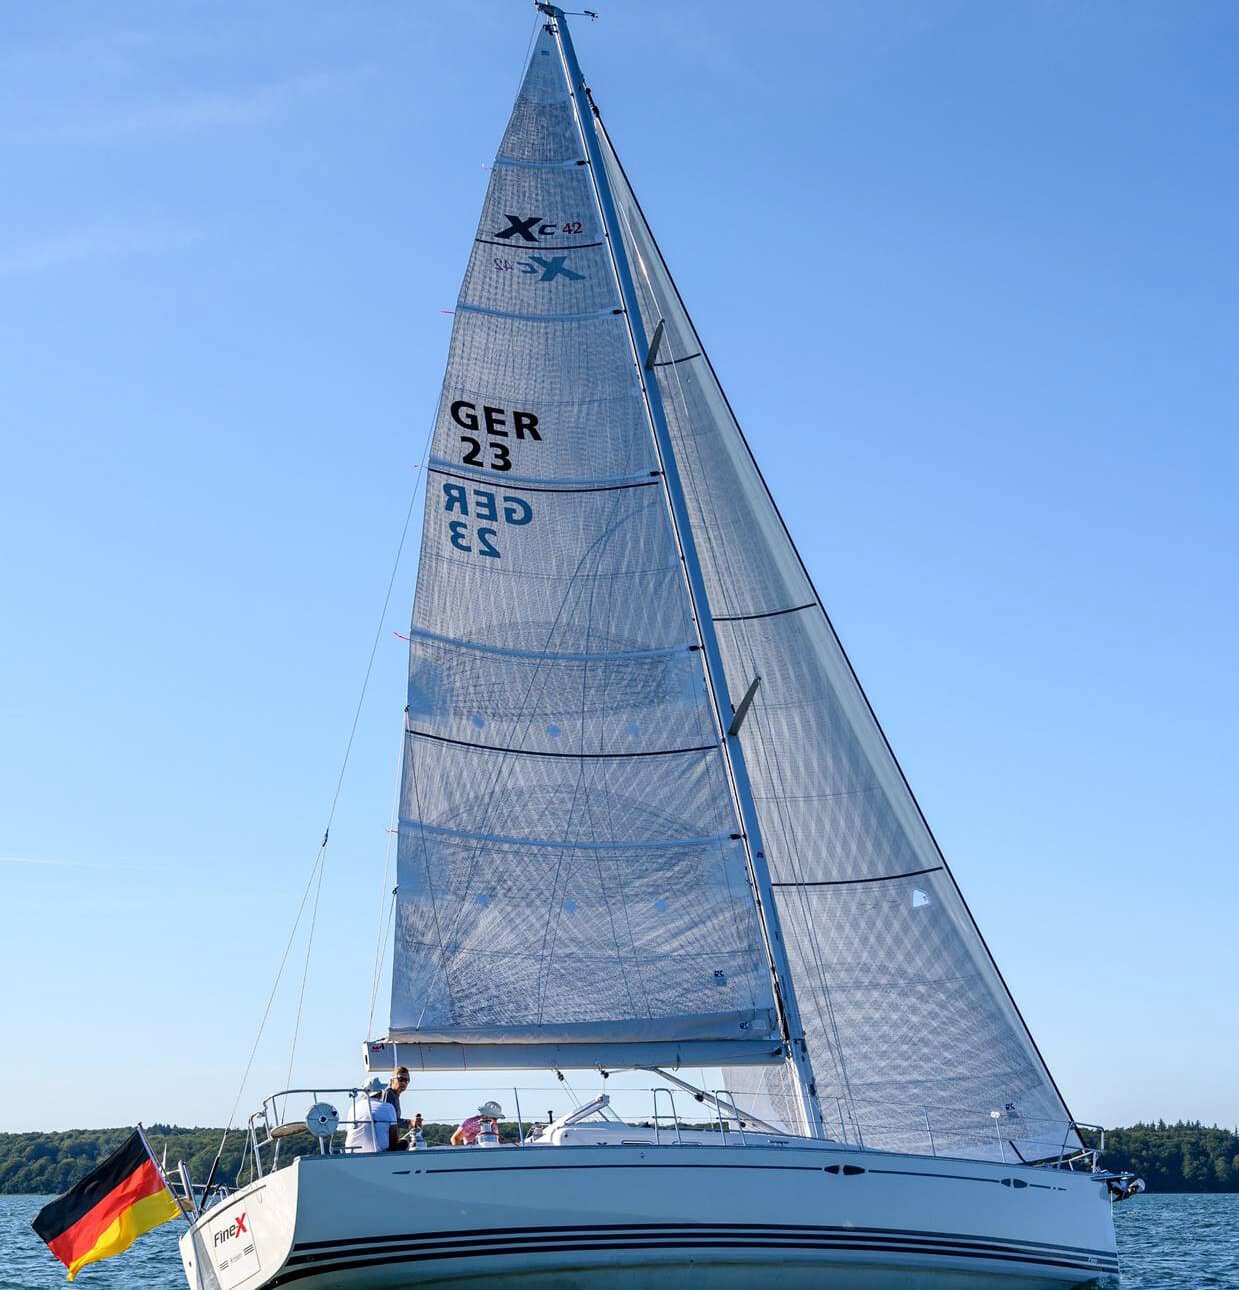 Titanium fully-battened mainsail and cruising genoa with foam luff on an XC42. Both sails have double-sided white taffeta.